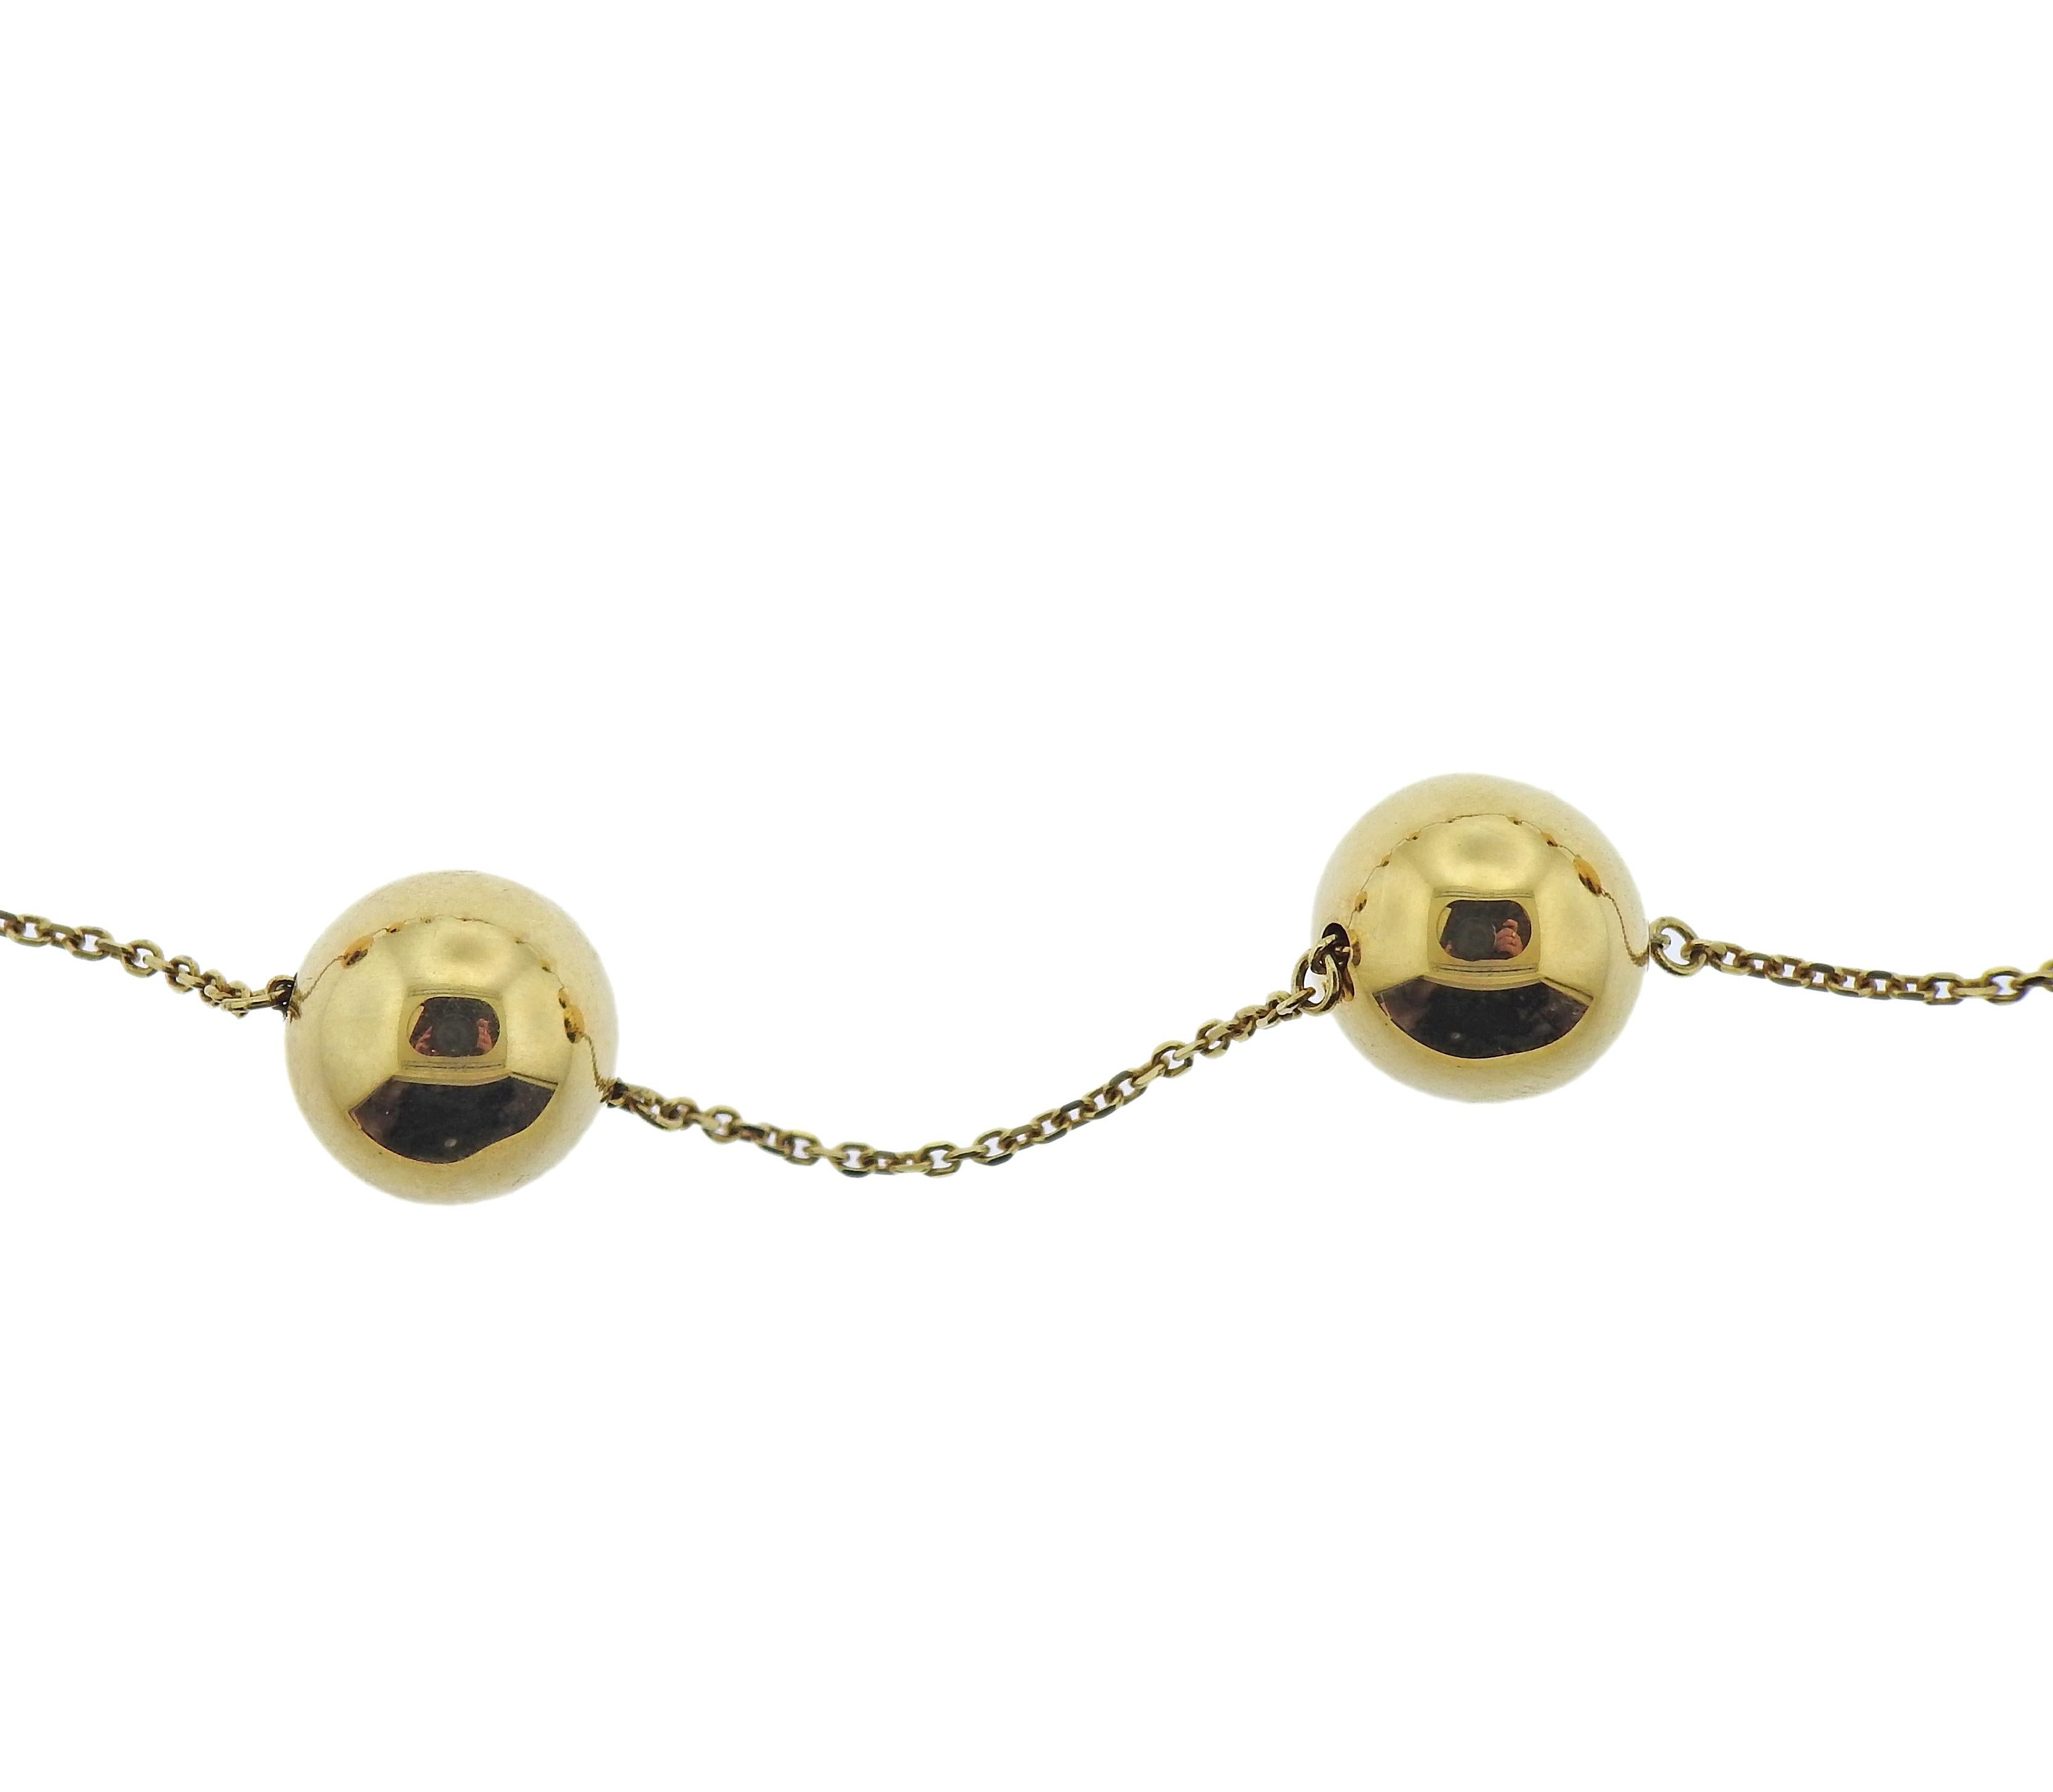 18k yellow gold Pallini ball station necklace by Roberto Coin. Necklace is 17.25